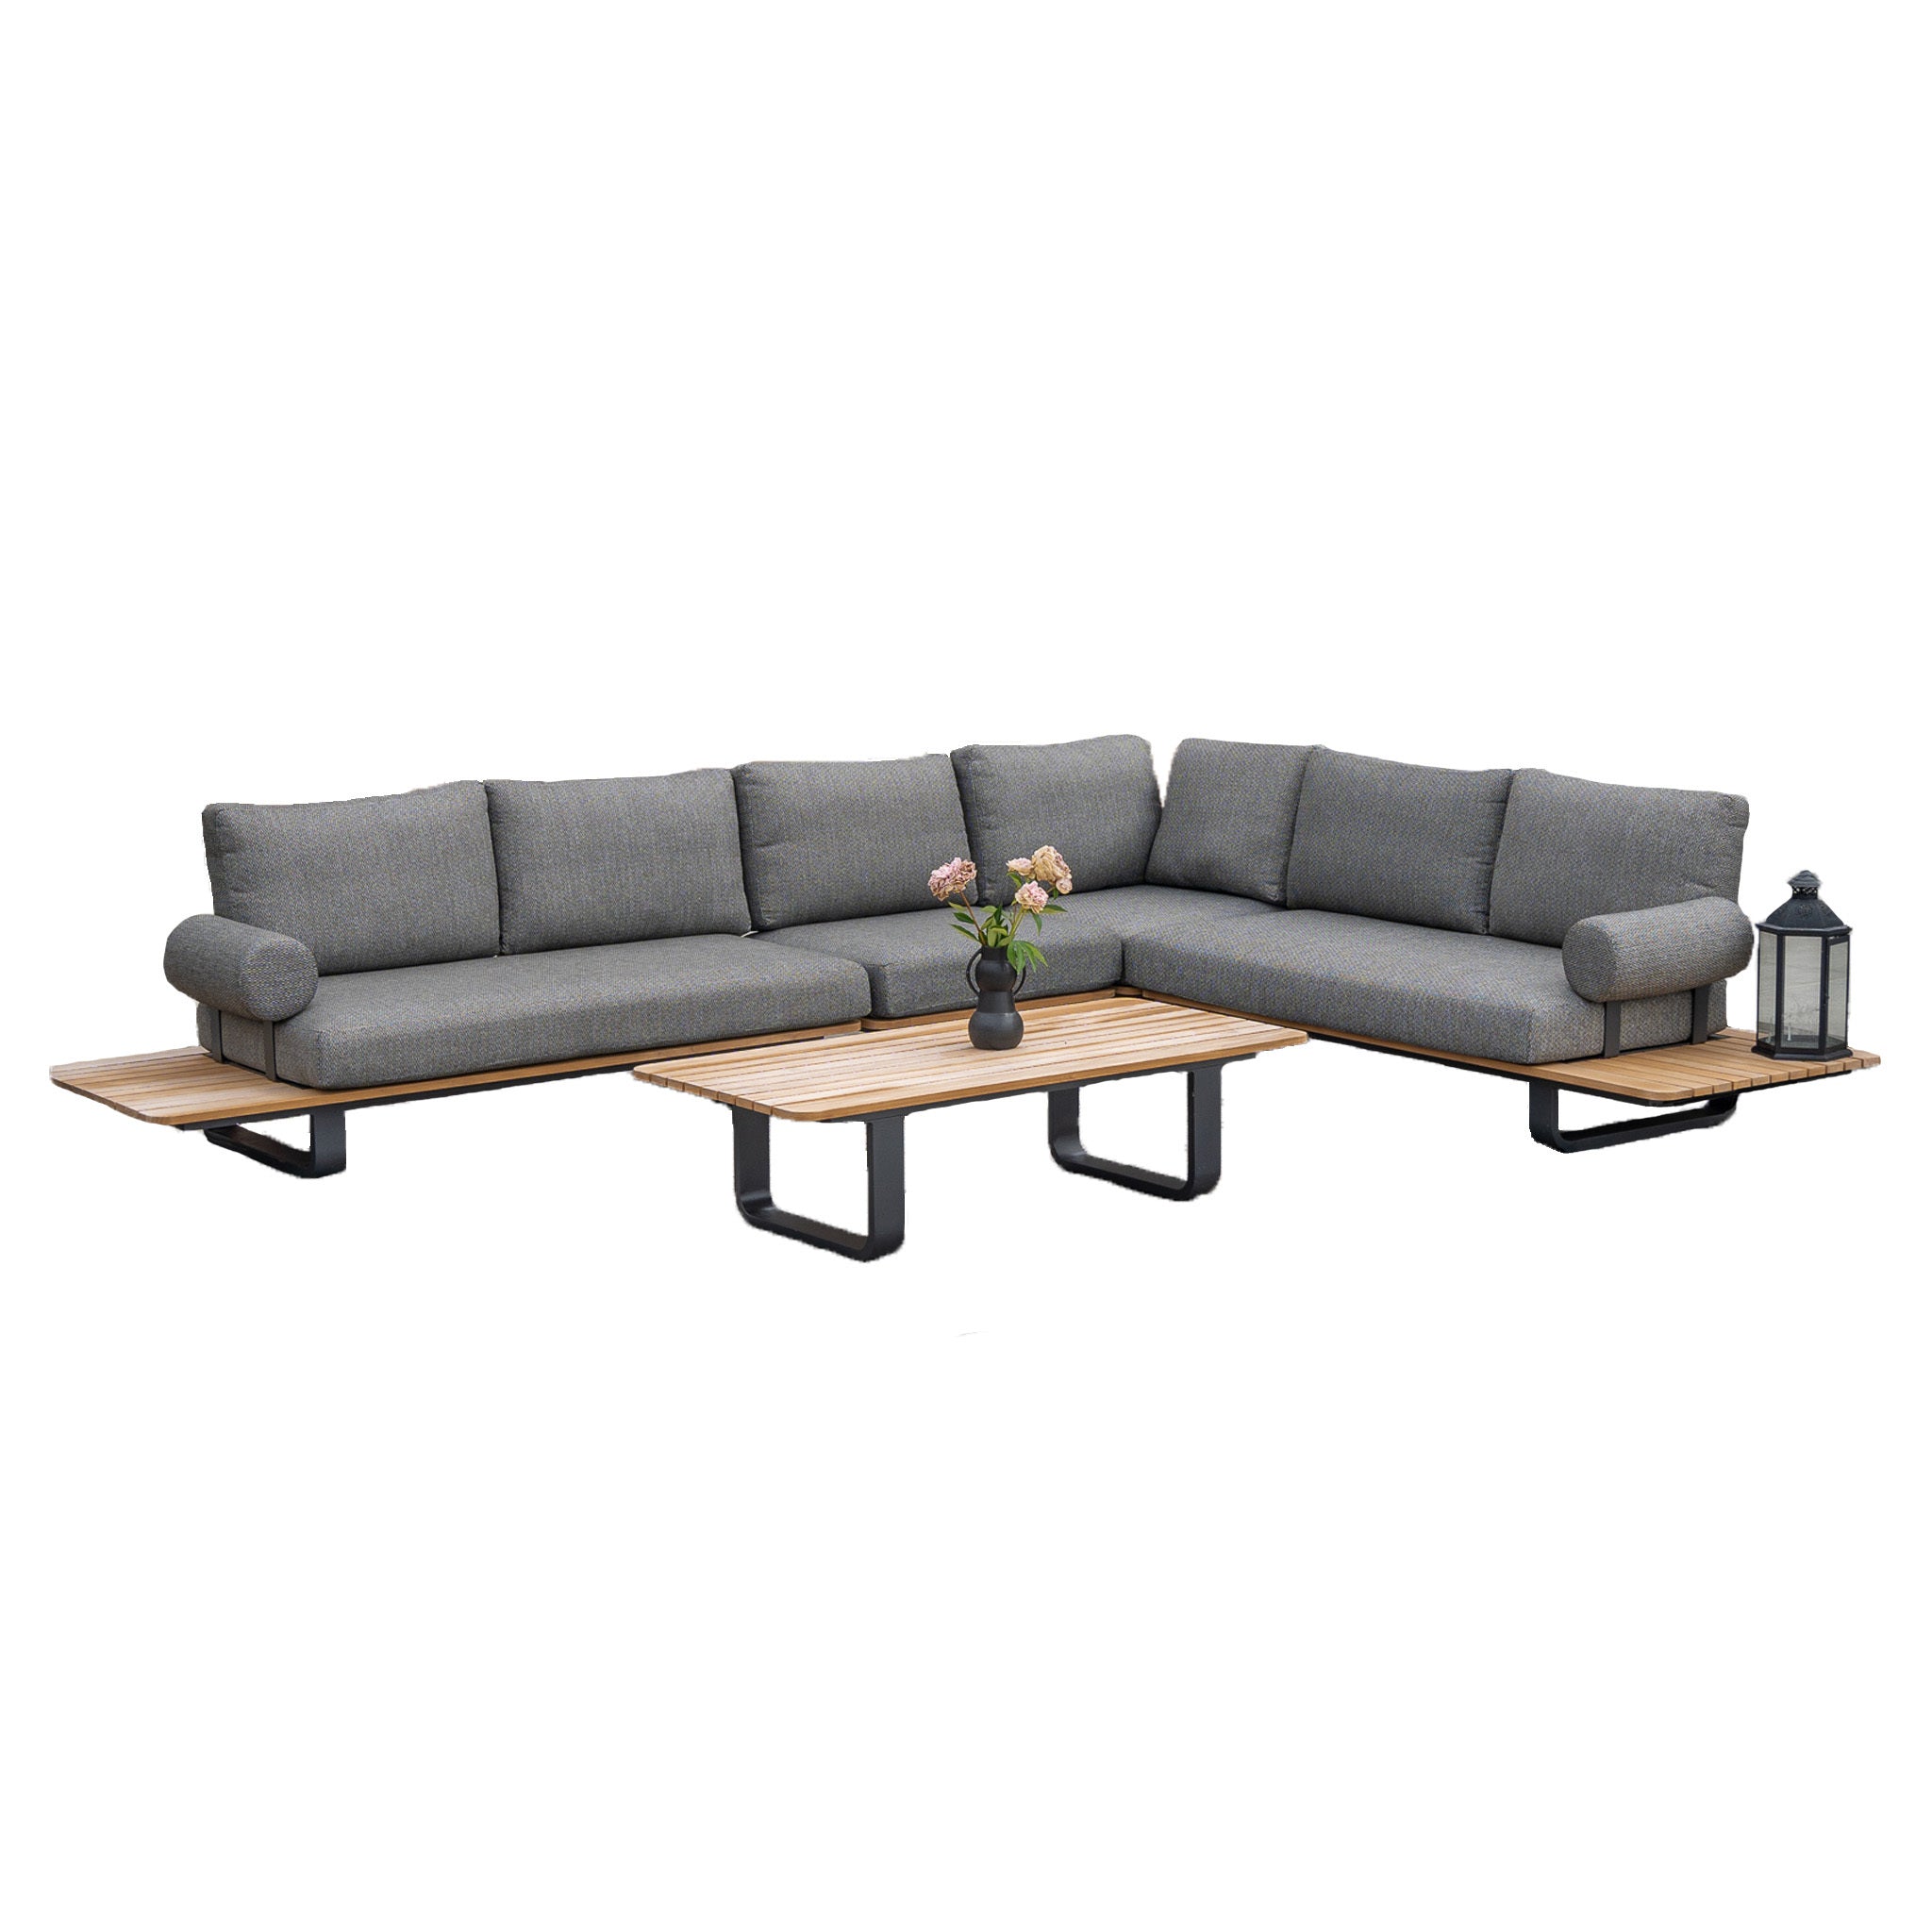 Bay Large Corner Group Set with 4 Waist Pillows and Teak Table in Charcoal